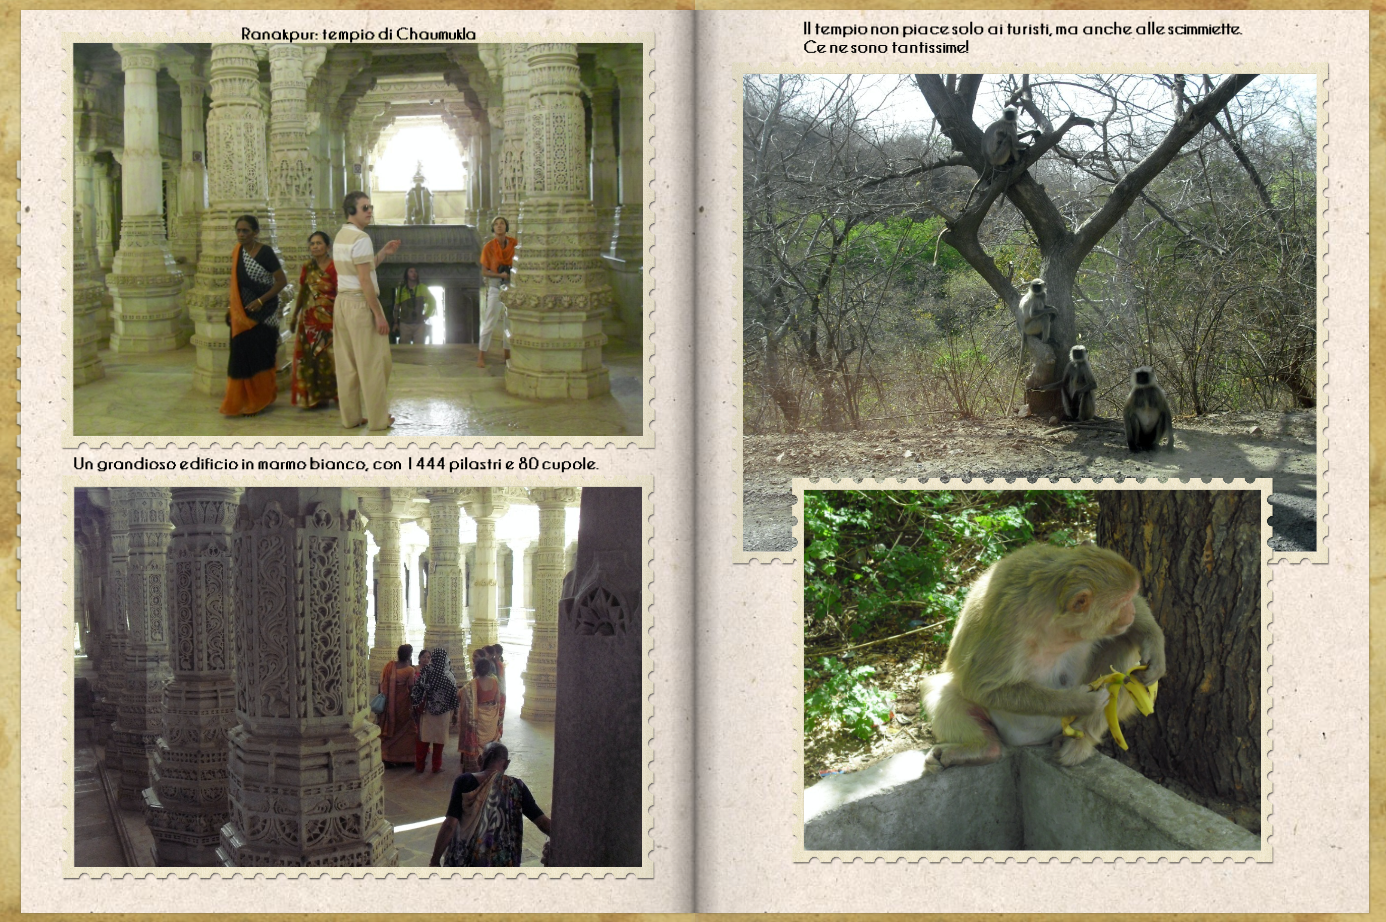 India pag 25